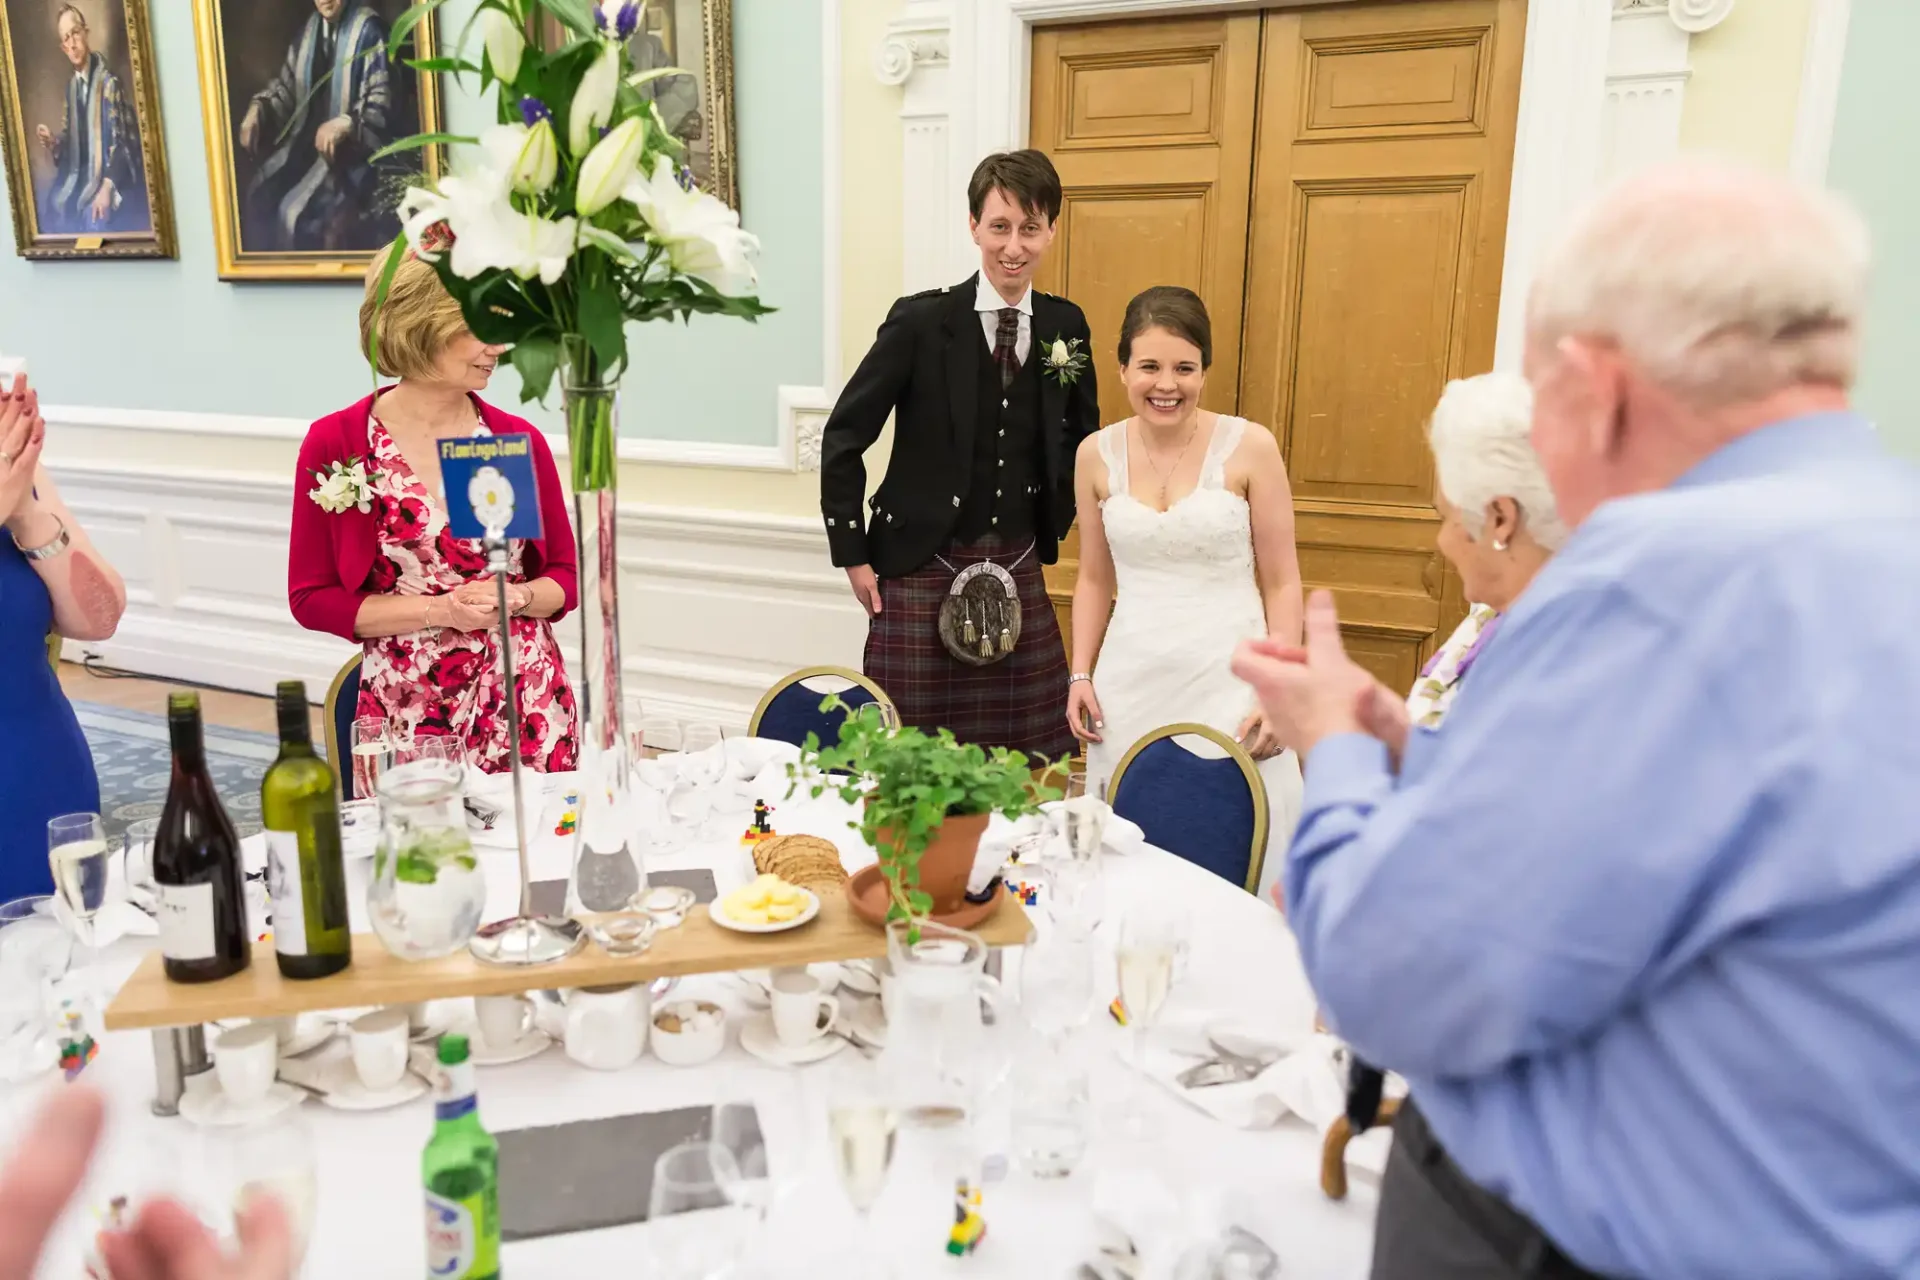 A newlywed couple smiles while walking through a clapping crowd at their wedding reception, the groom in a kilt and the bride in a strapless dress.